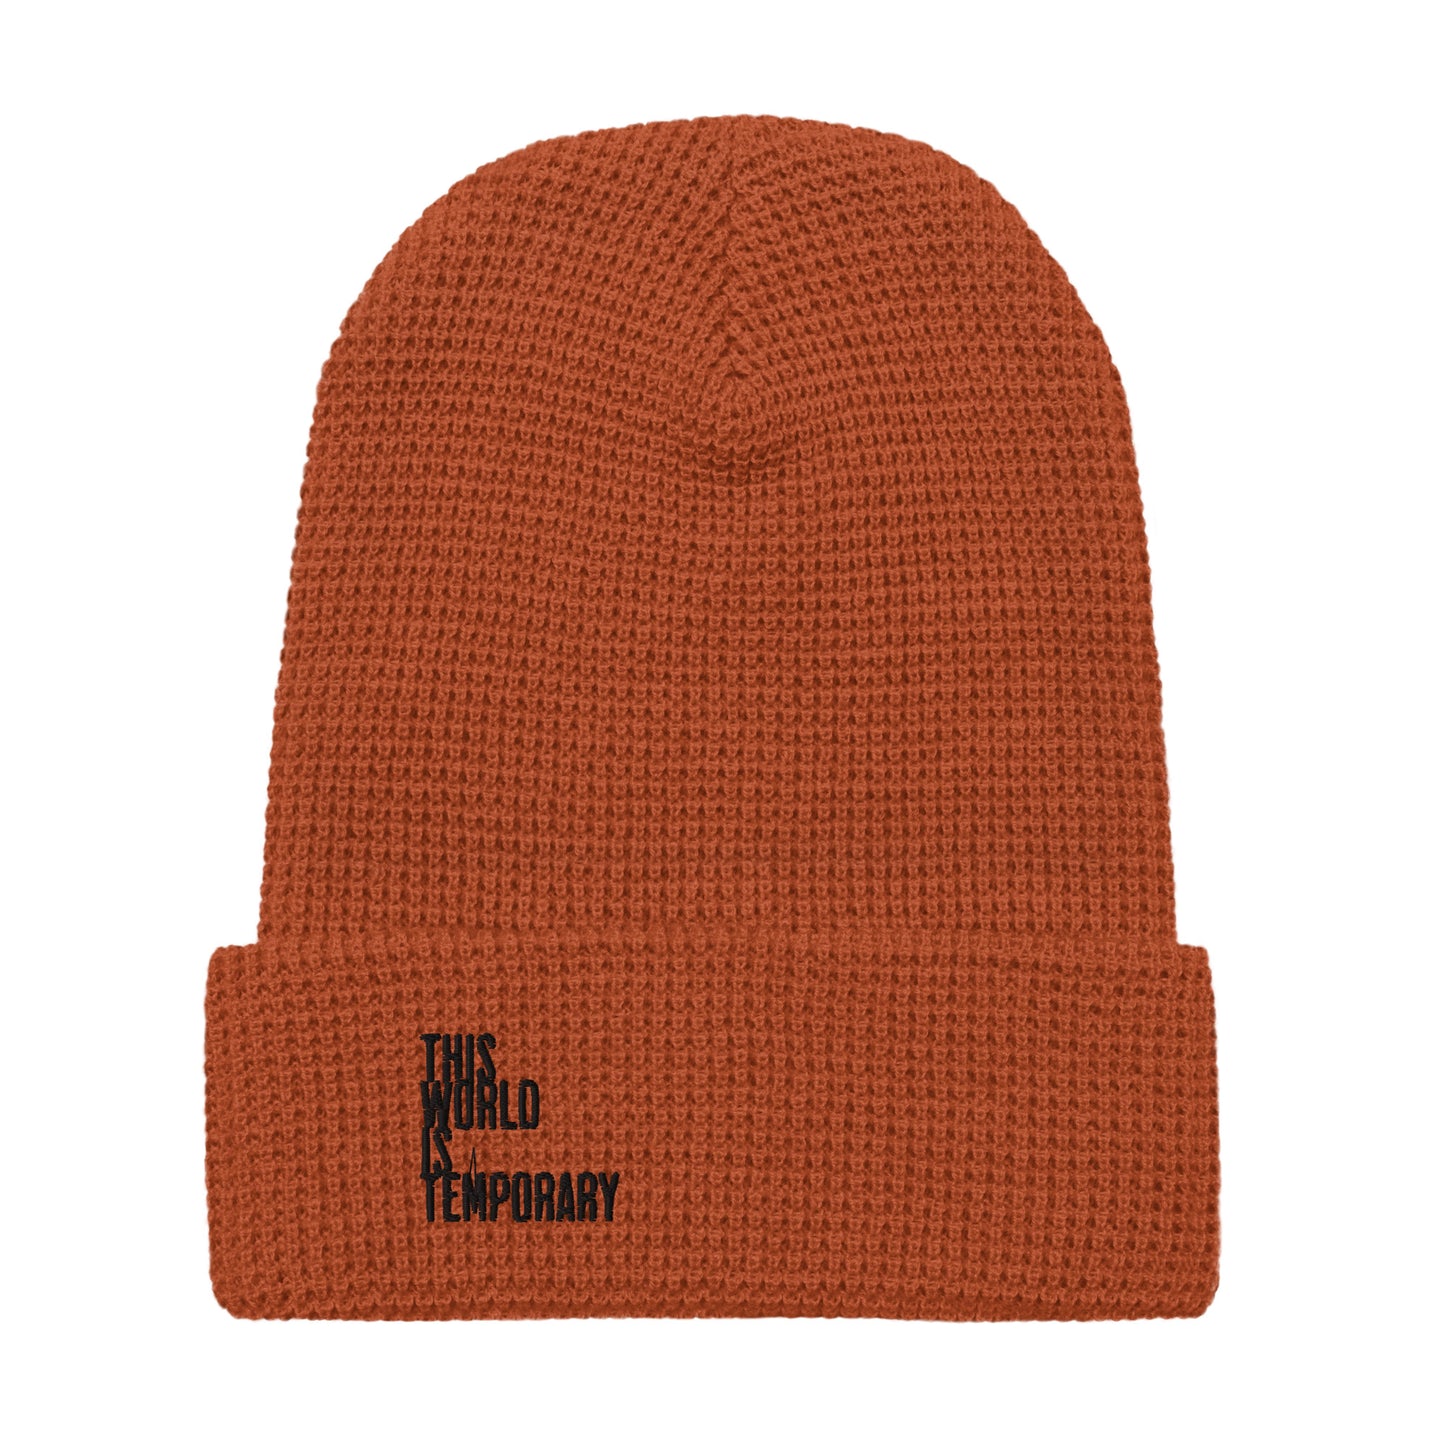 This World is Temporary Waffle Beanie